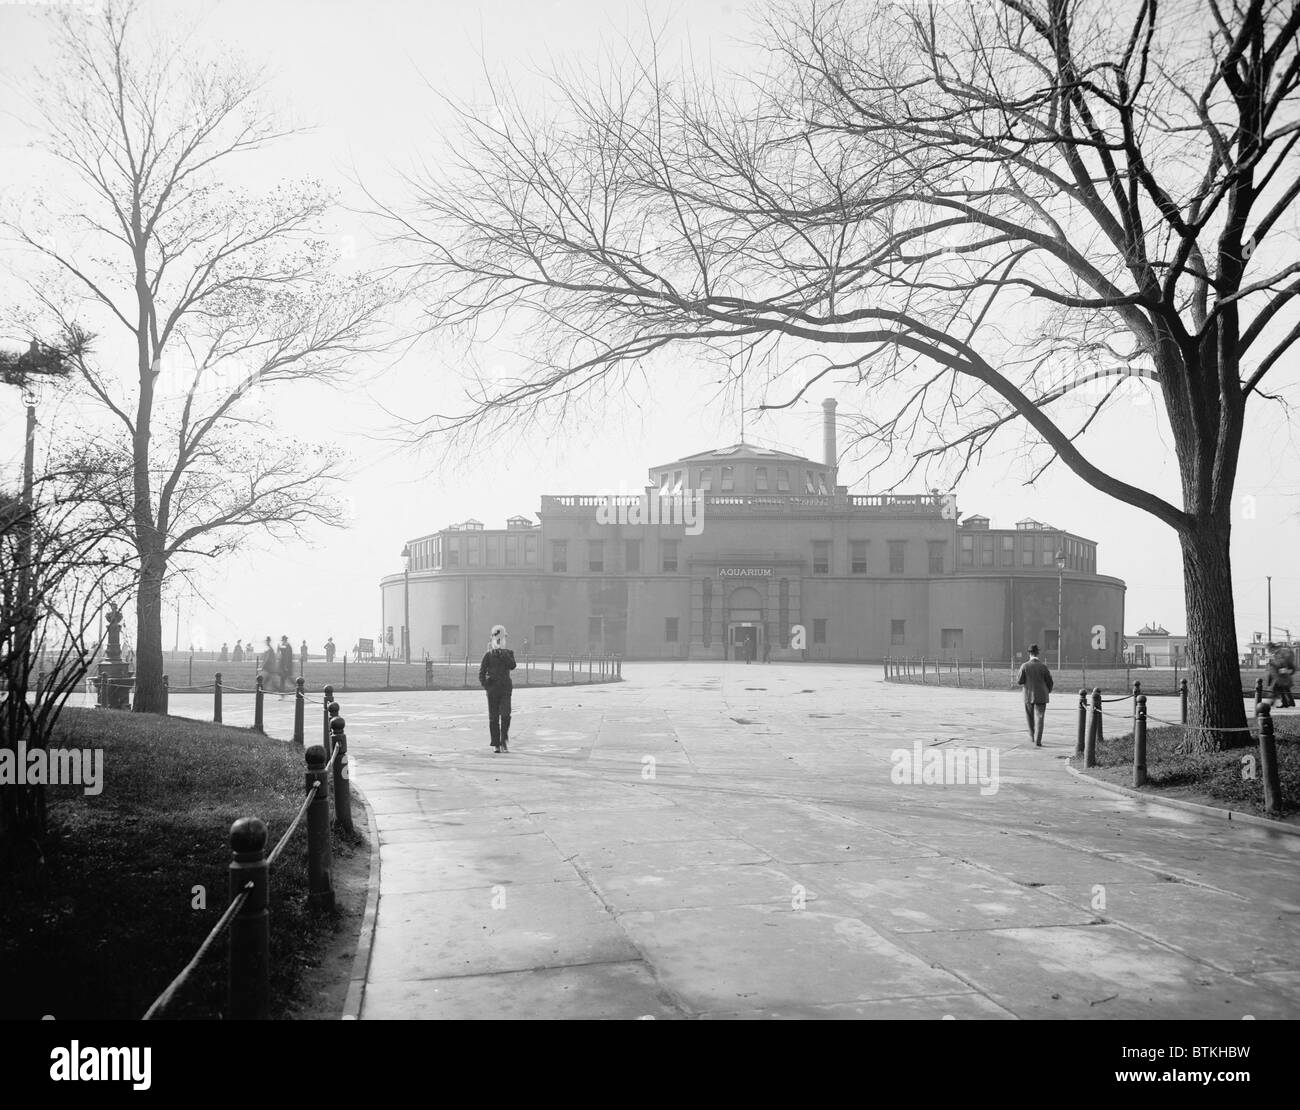 Castle Garden at New York City's Battery was built in New York Harbor to defend against a British invasion during the Napoleonic wars in 1807. When Ellis island took over immigrant reception in 1905, it was converted into an aquarium. Ca. 1901. Stock Photo